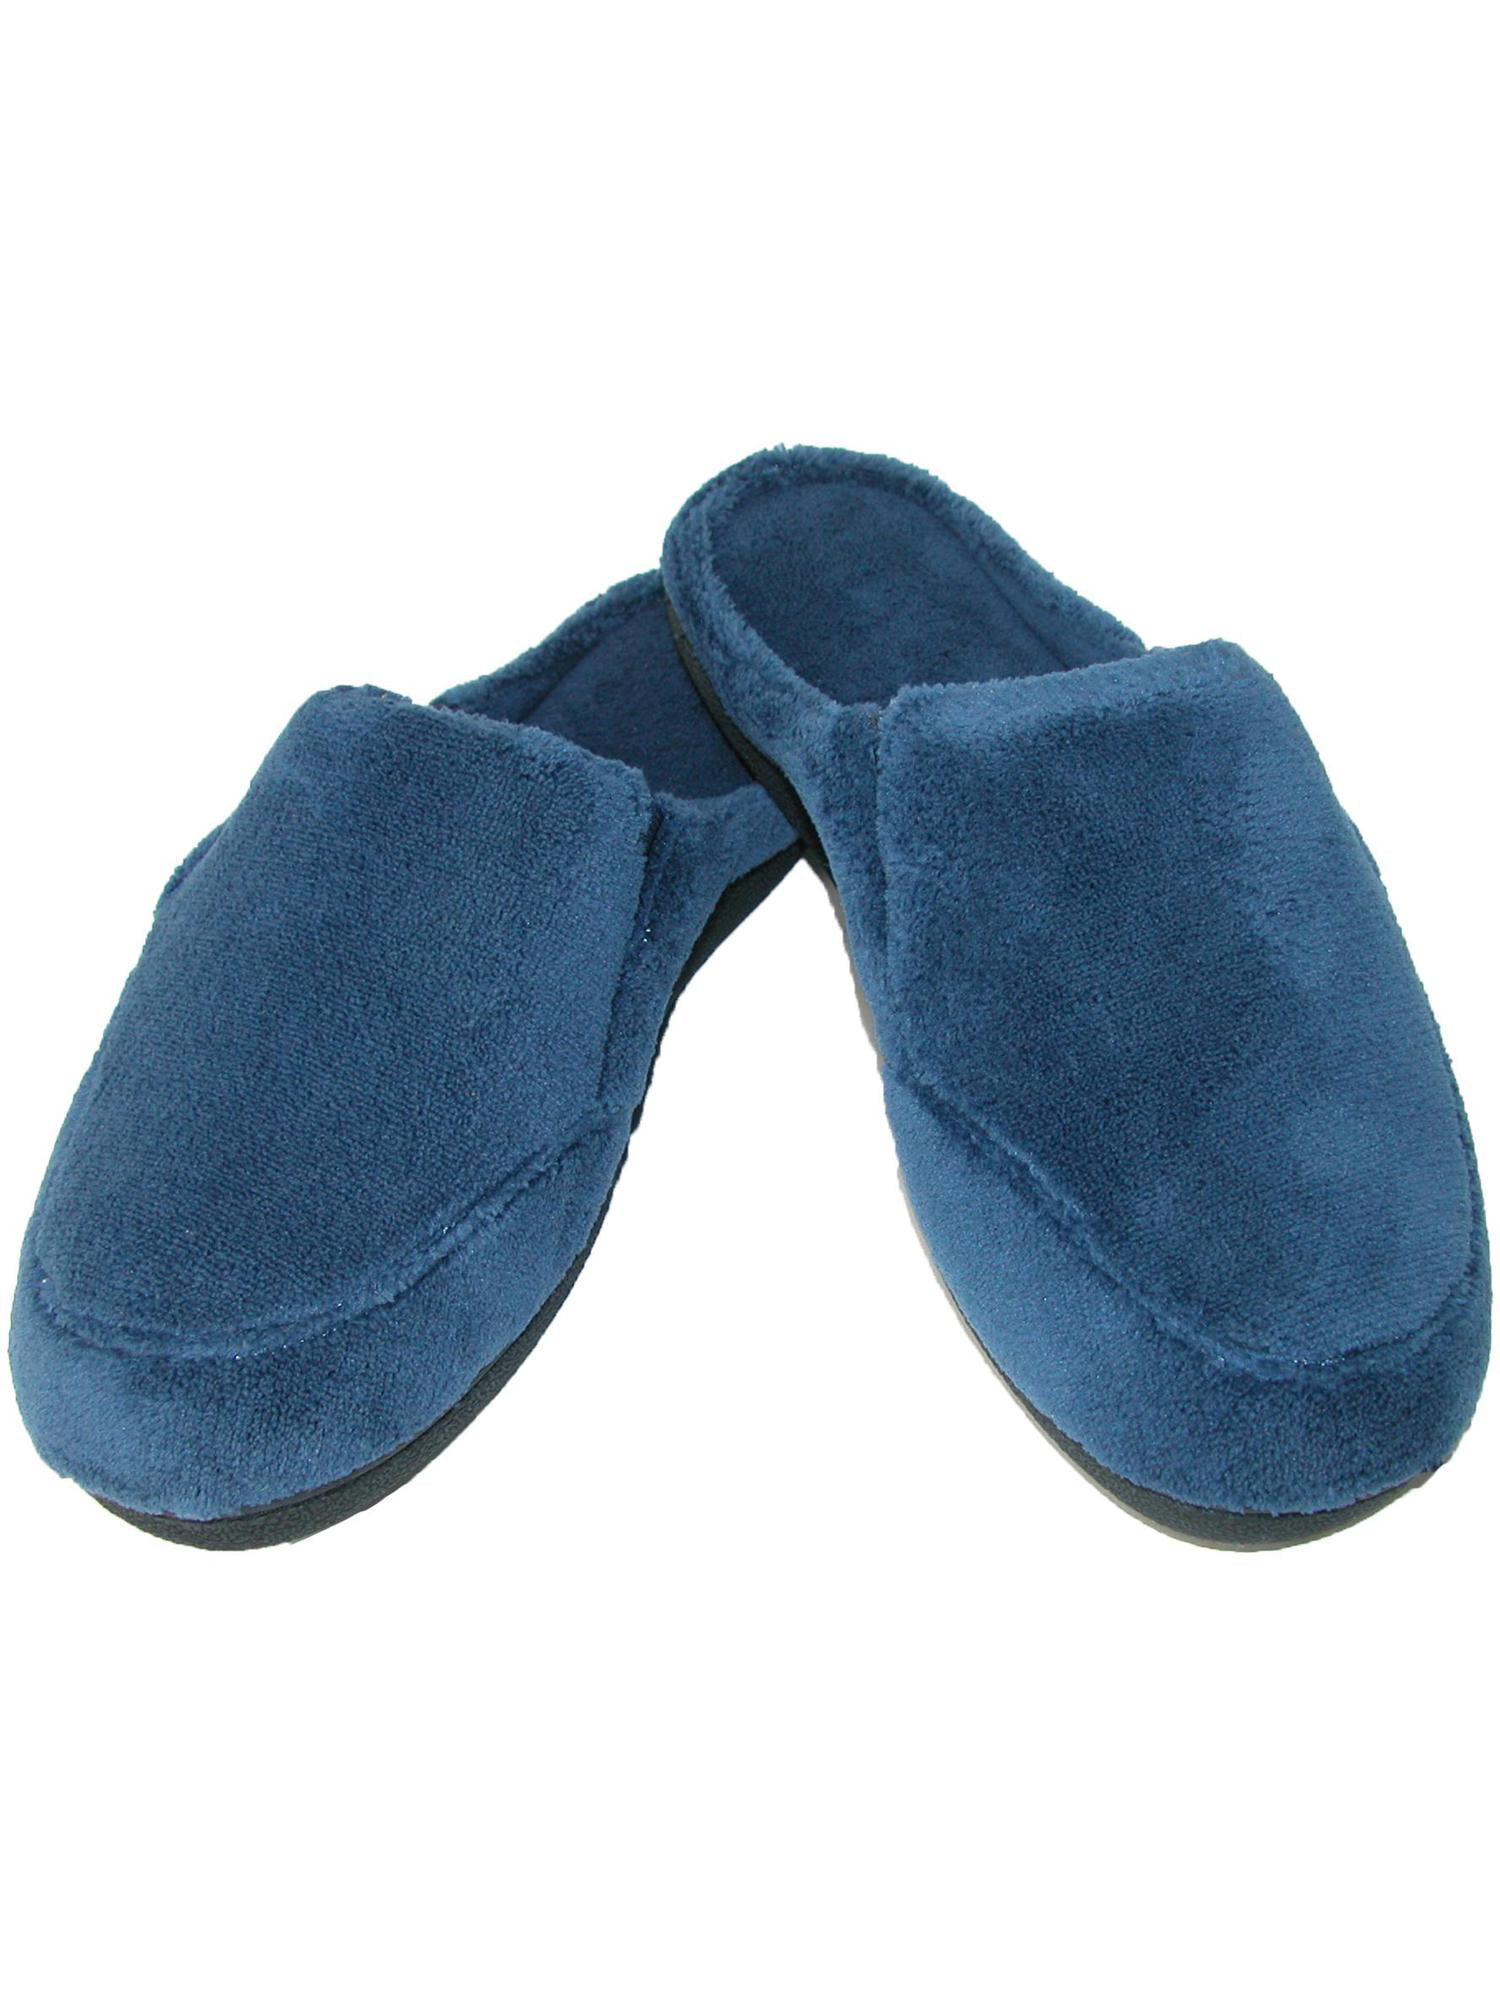 isotoner men's microterry clog slippers